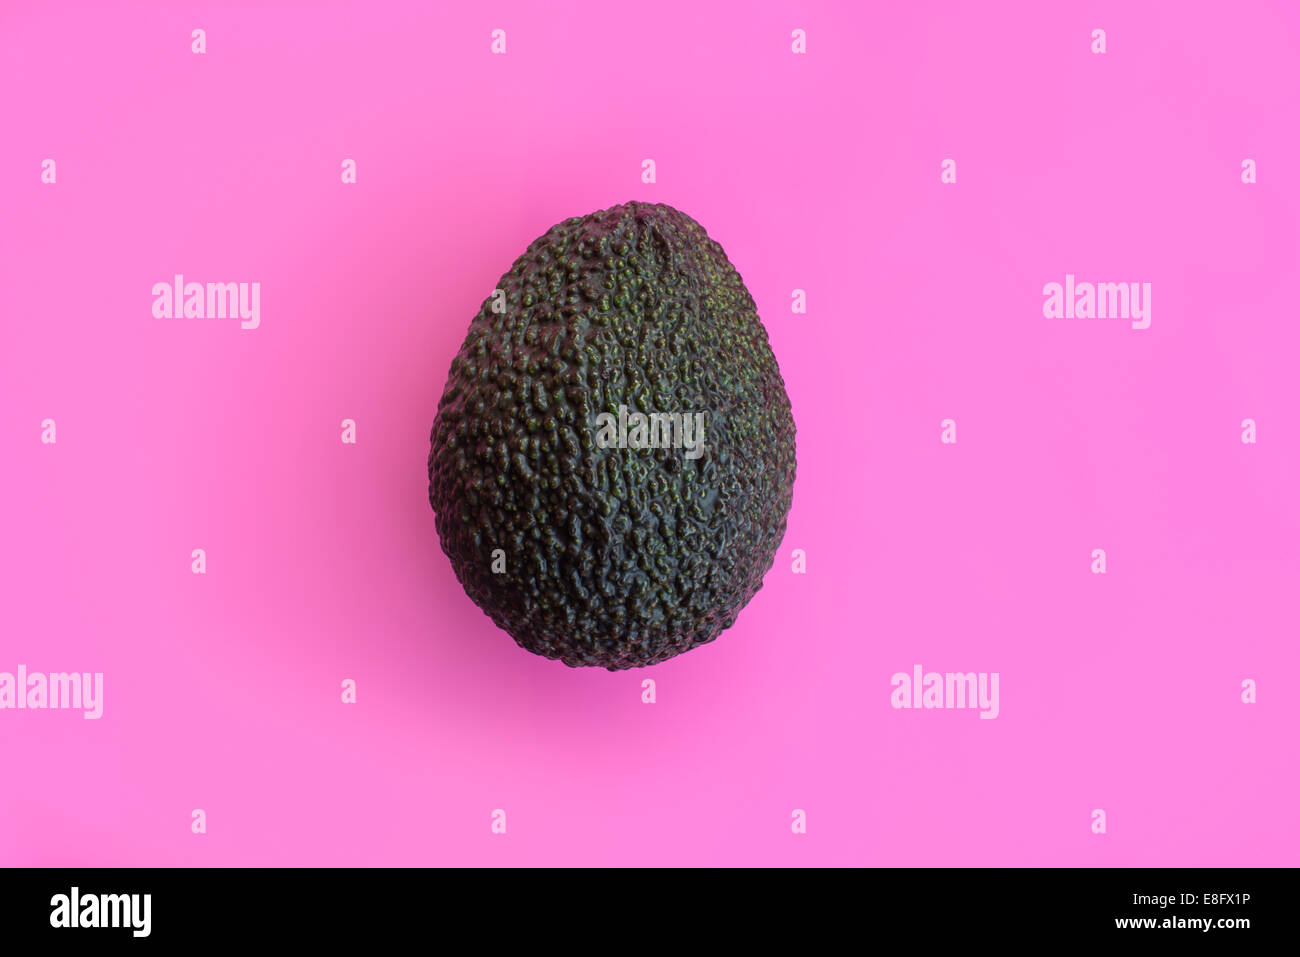 Avocado on a pink background Stock Photo